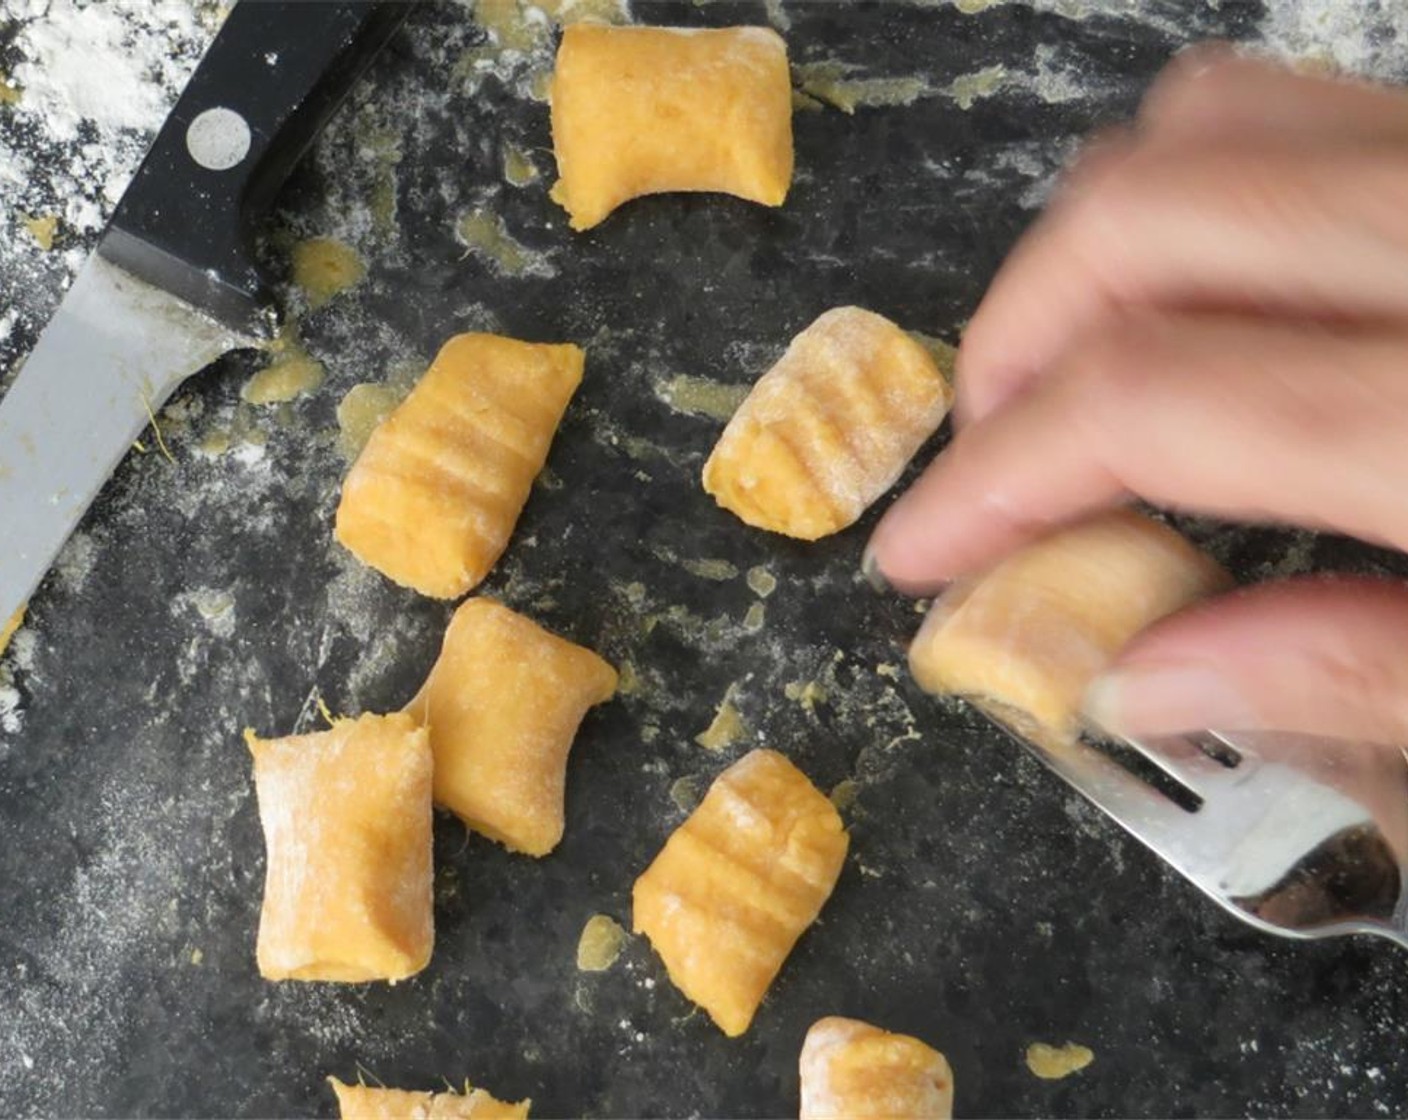 step 9 Use a sharp knife to cut 1-inch segments. Use a fork, tines facing down, to make the ridges. Hold one of the gnocchi and gently roll it from the bend in the fork, along the tines, pressing lightly. Repeat with remaining dough.